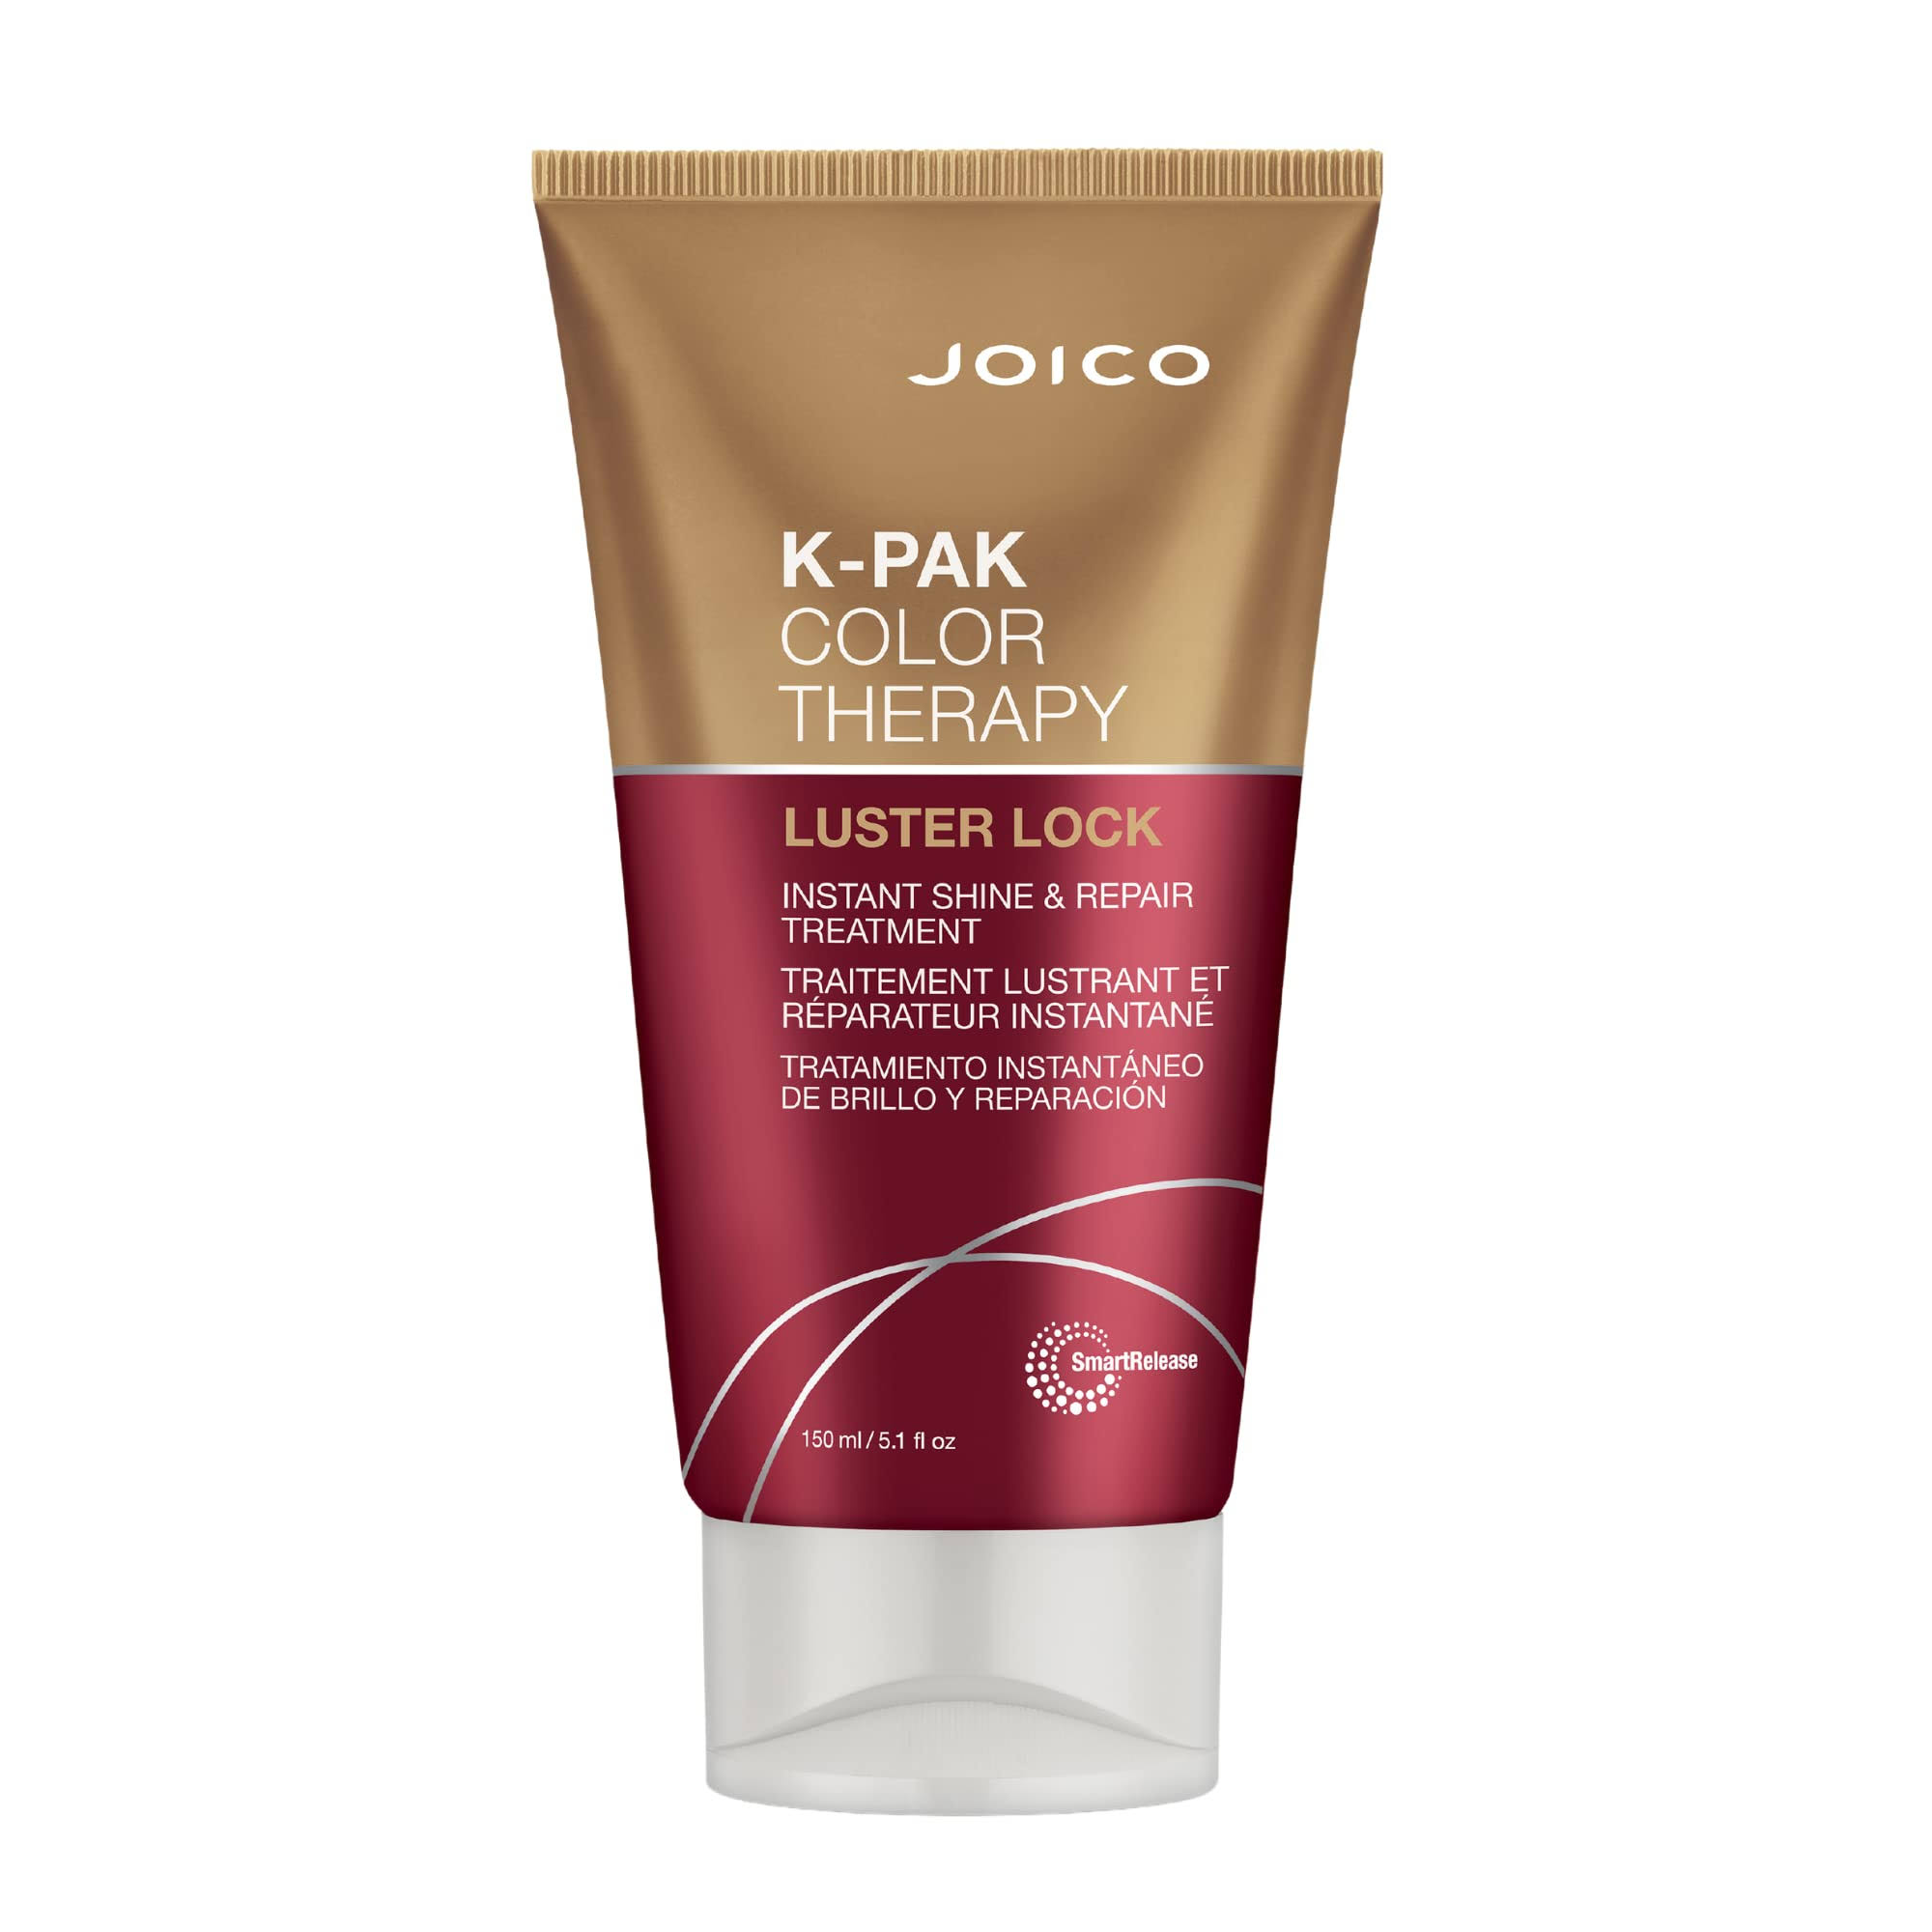 Joico K-Pak Color Therapy Luster Lock - 5.1 oz